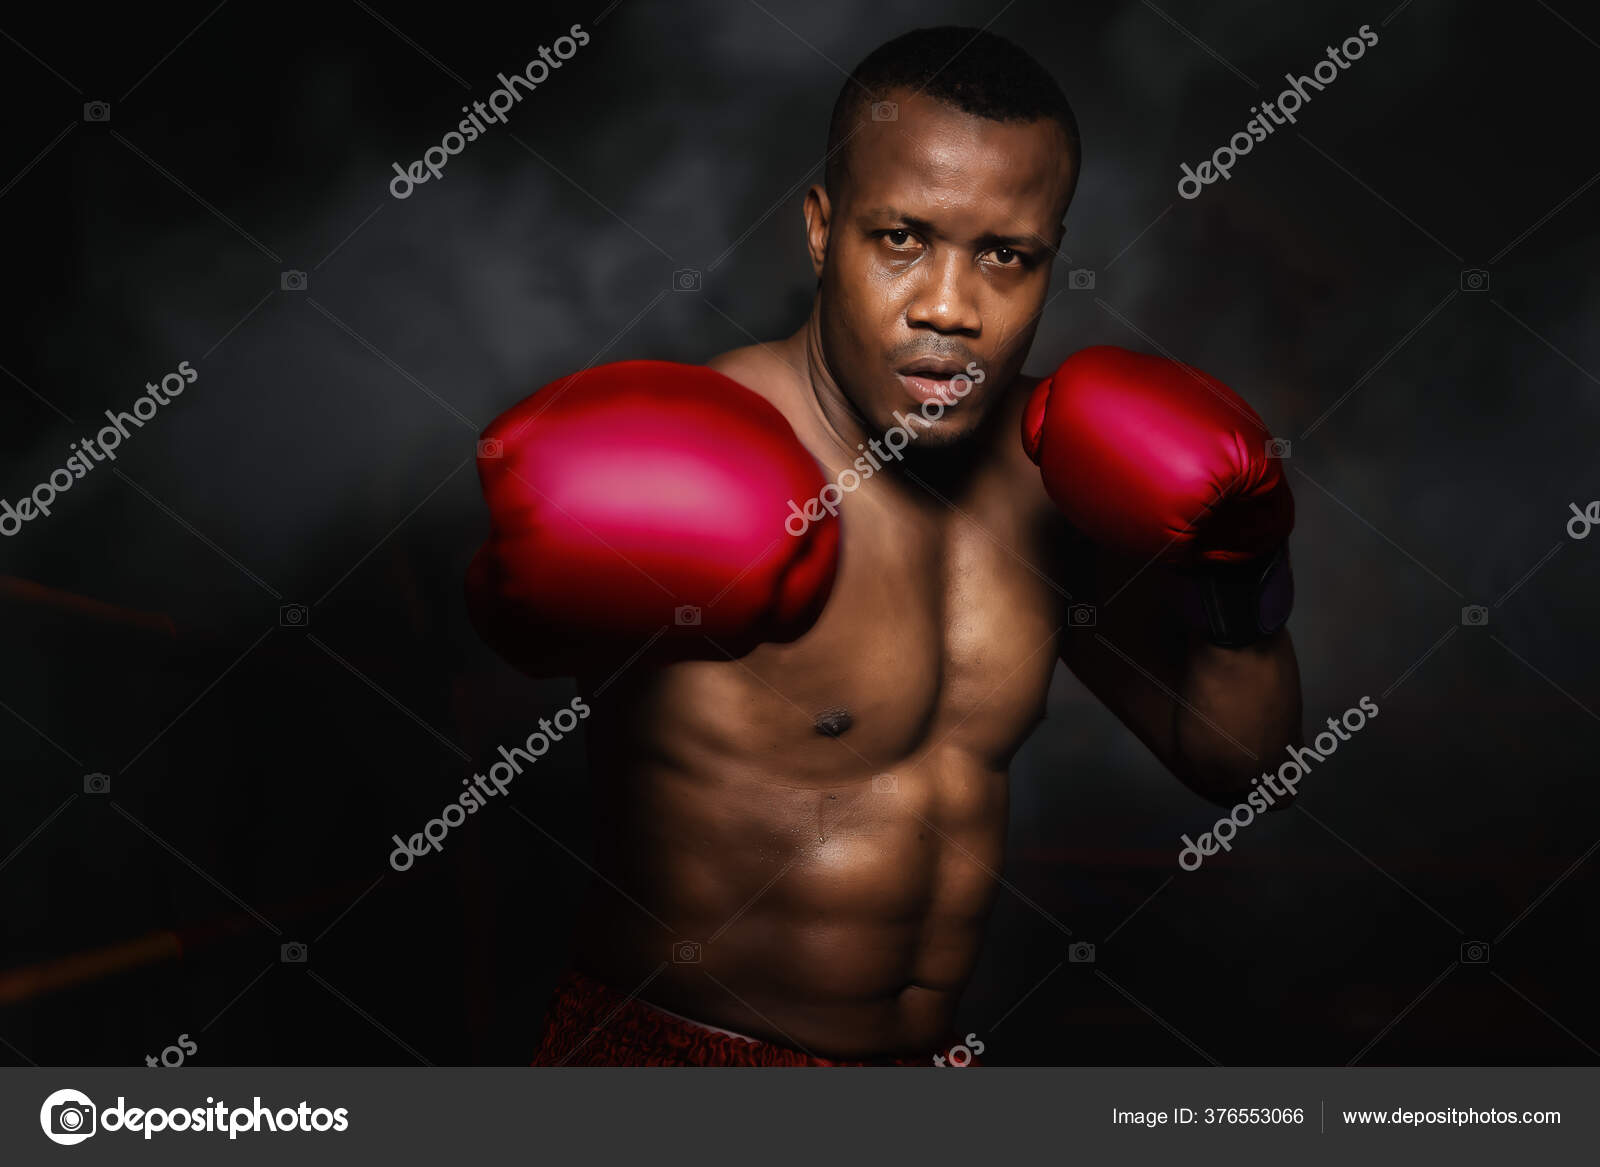 Redglove Boxing